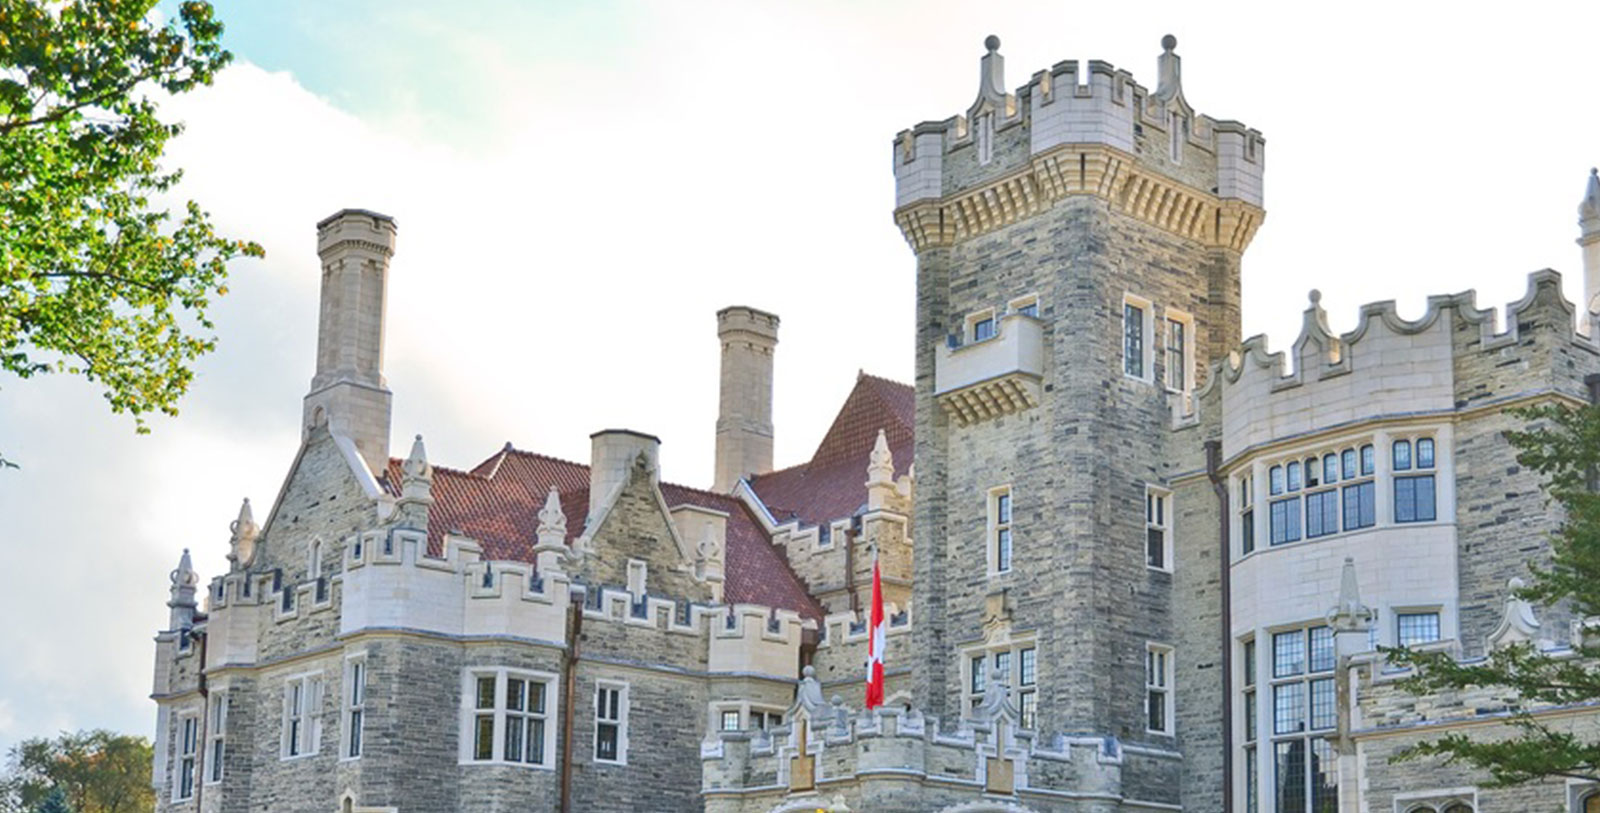 Experience Casa Loma, a Gothic Revival-style mansion constructed in 1911.